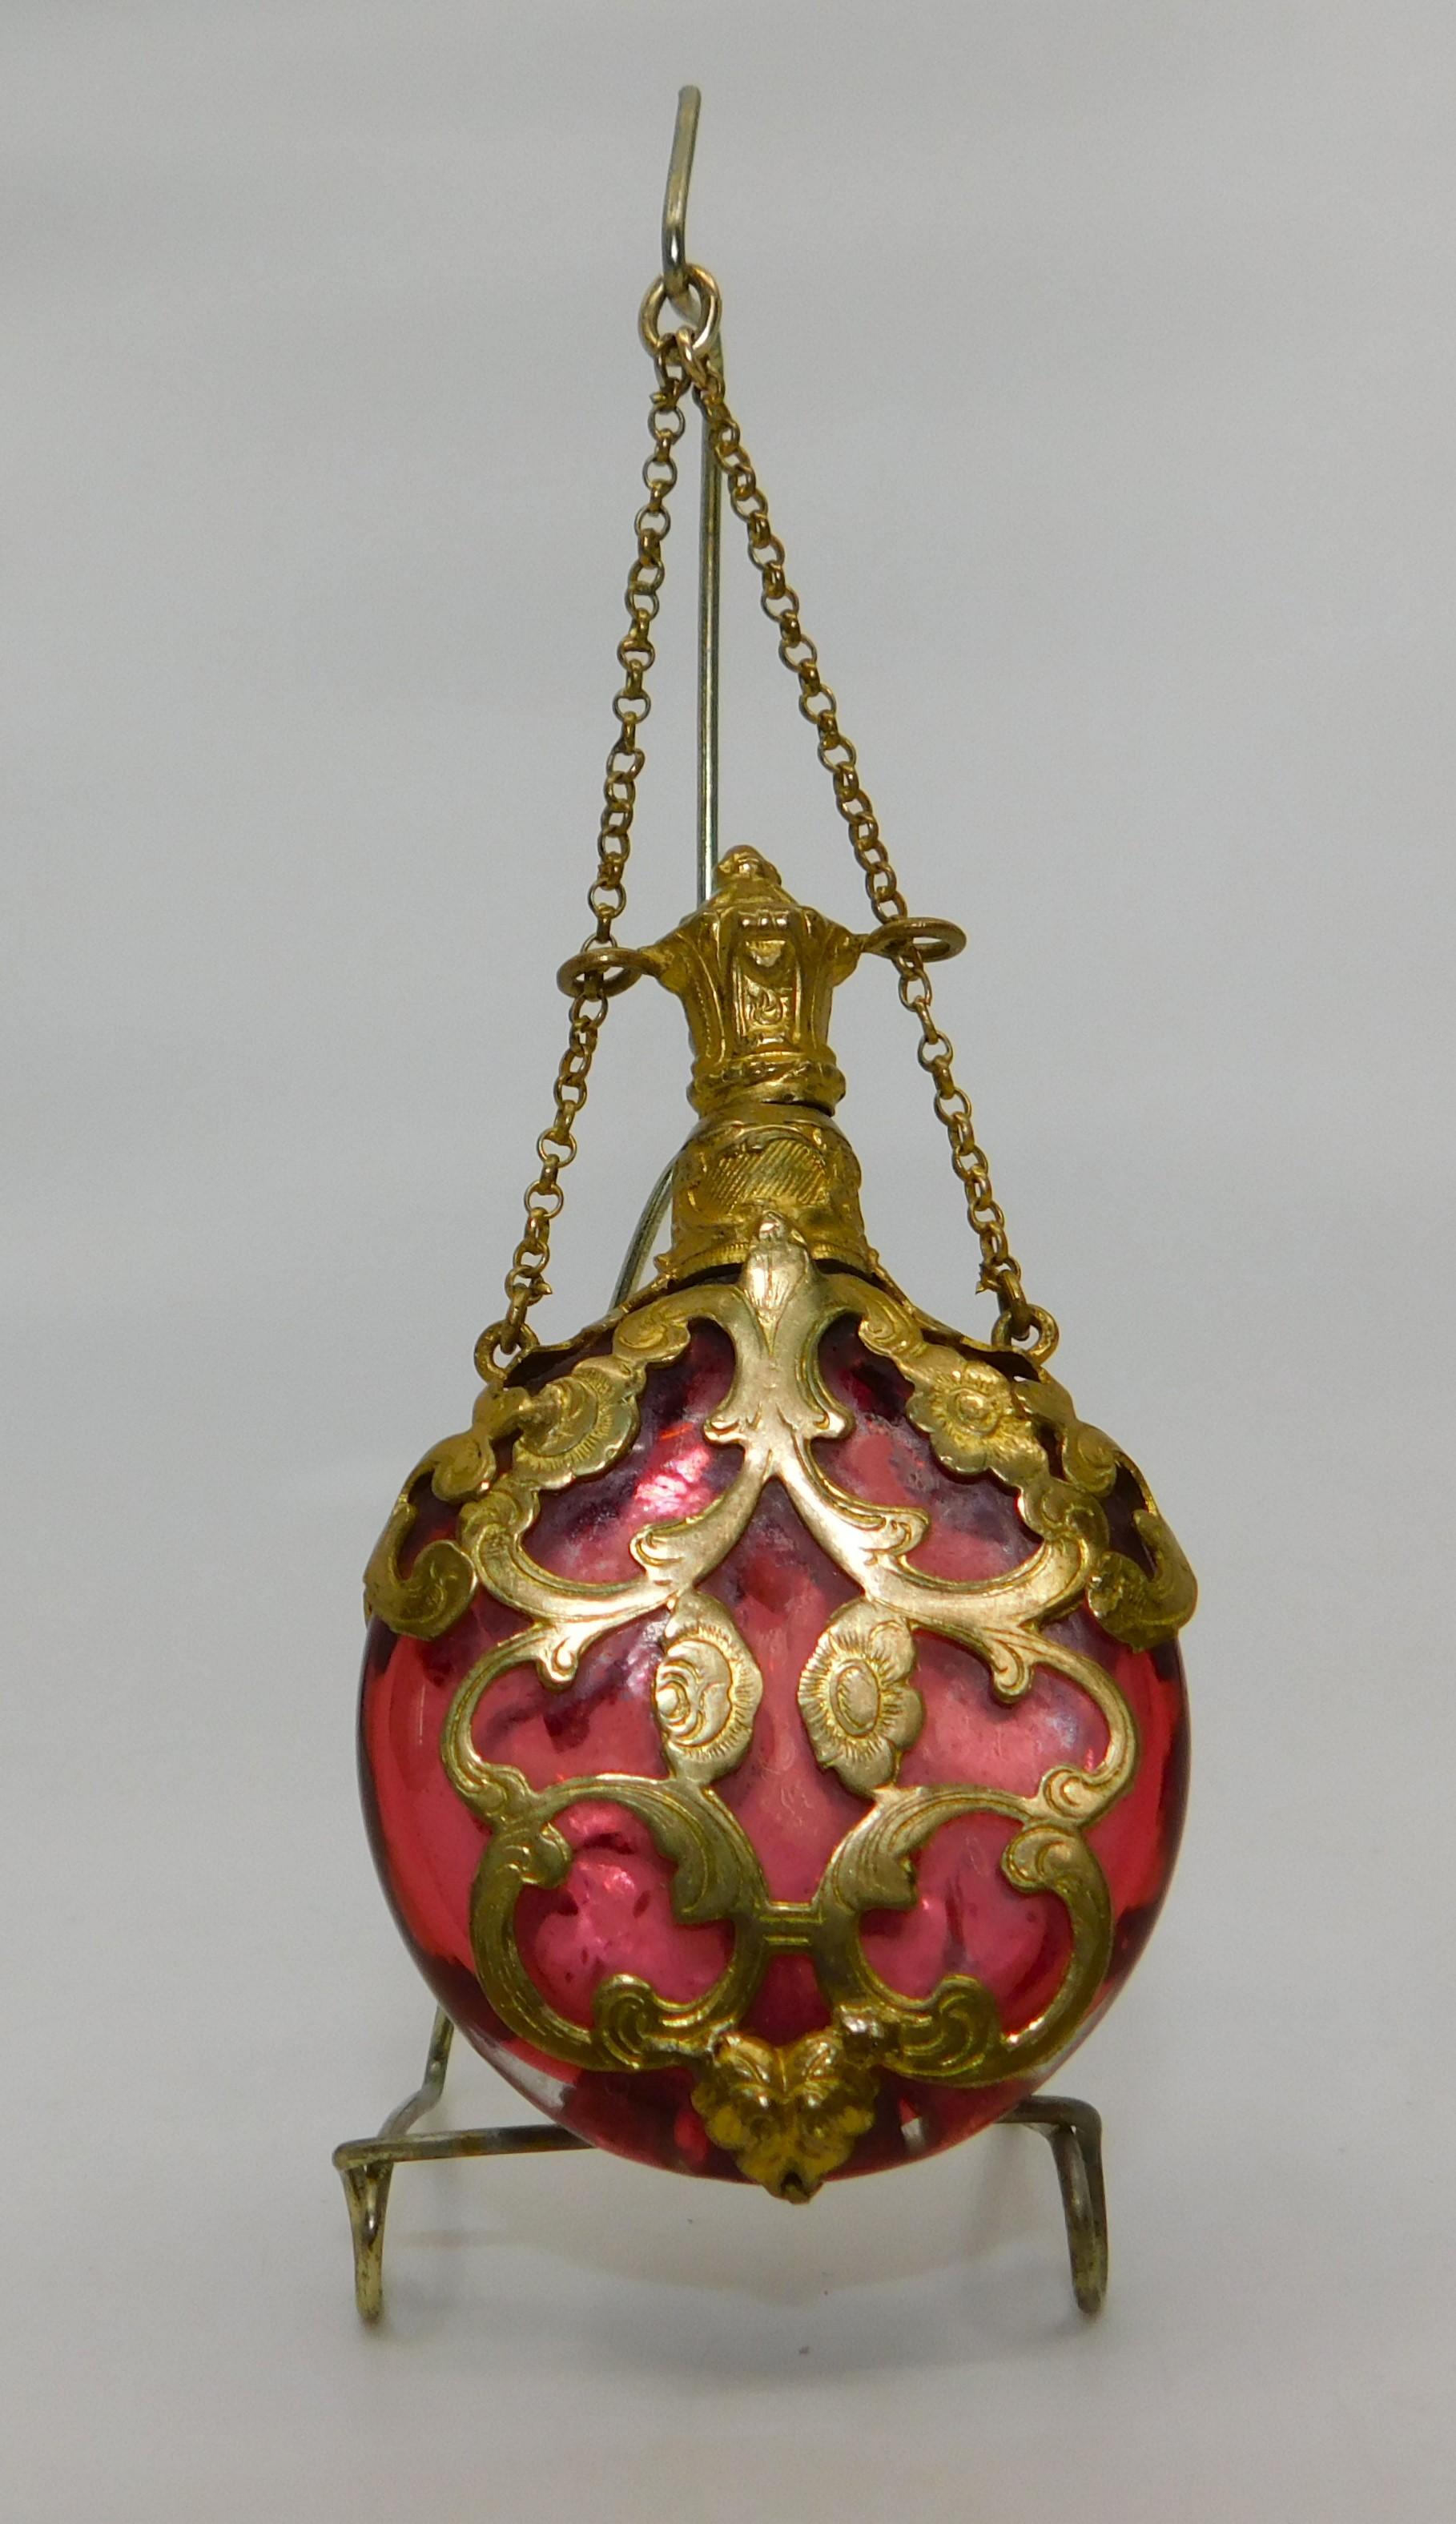 Hand-Crafted Antique Cranberry Glass Chatelaine Perfume Bottle with Gold Filigree Circa 1880 For Sale